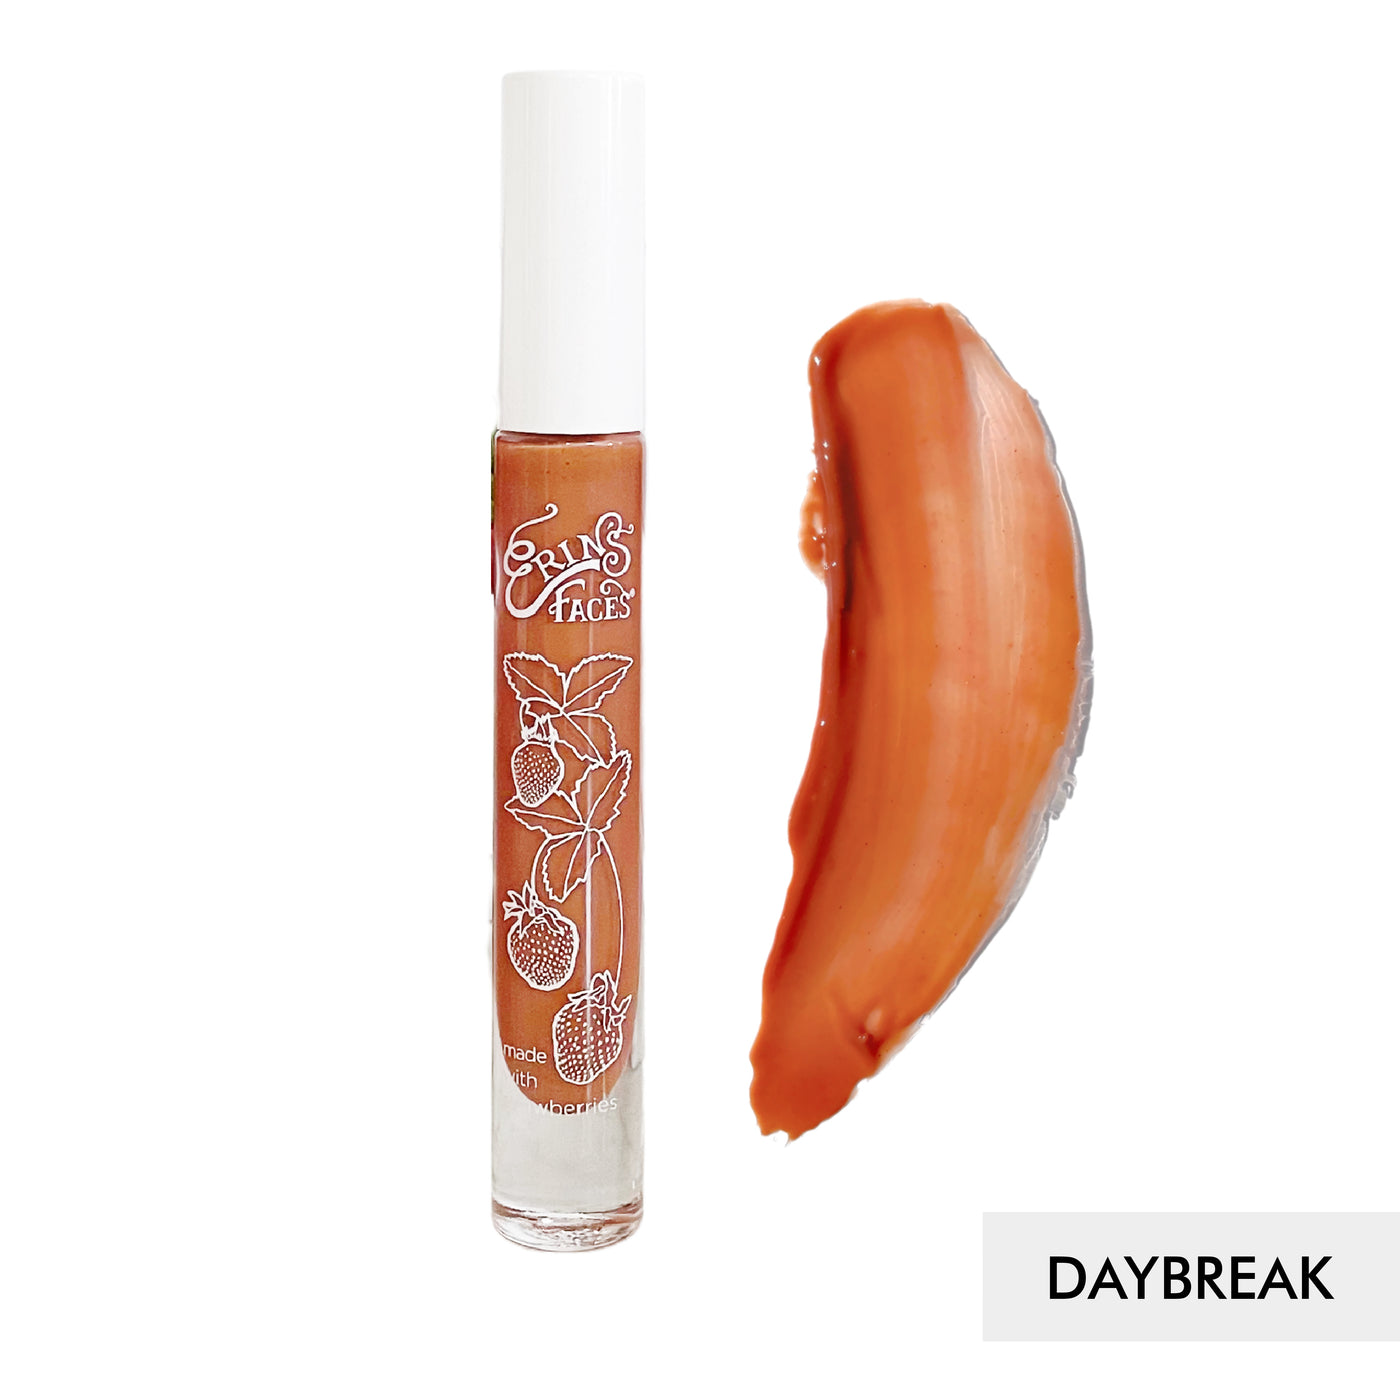 erin's faces fruit smoothie lip gloss bottle and swatch against white background of the shade daybreak